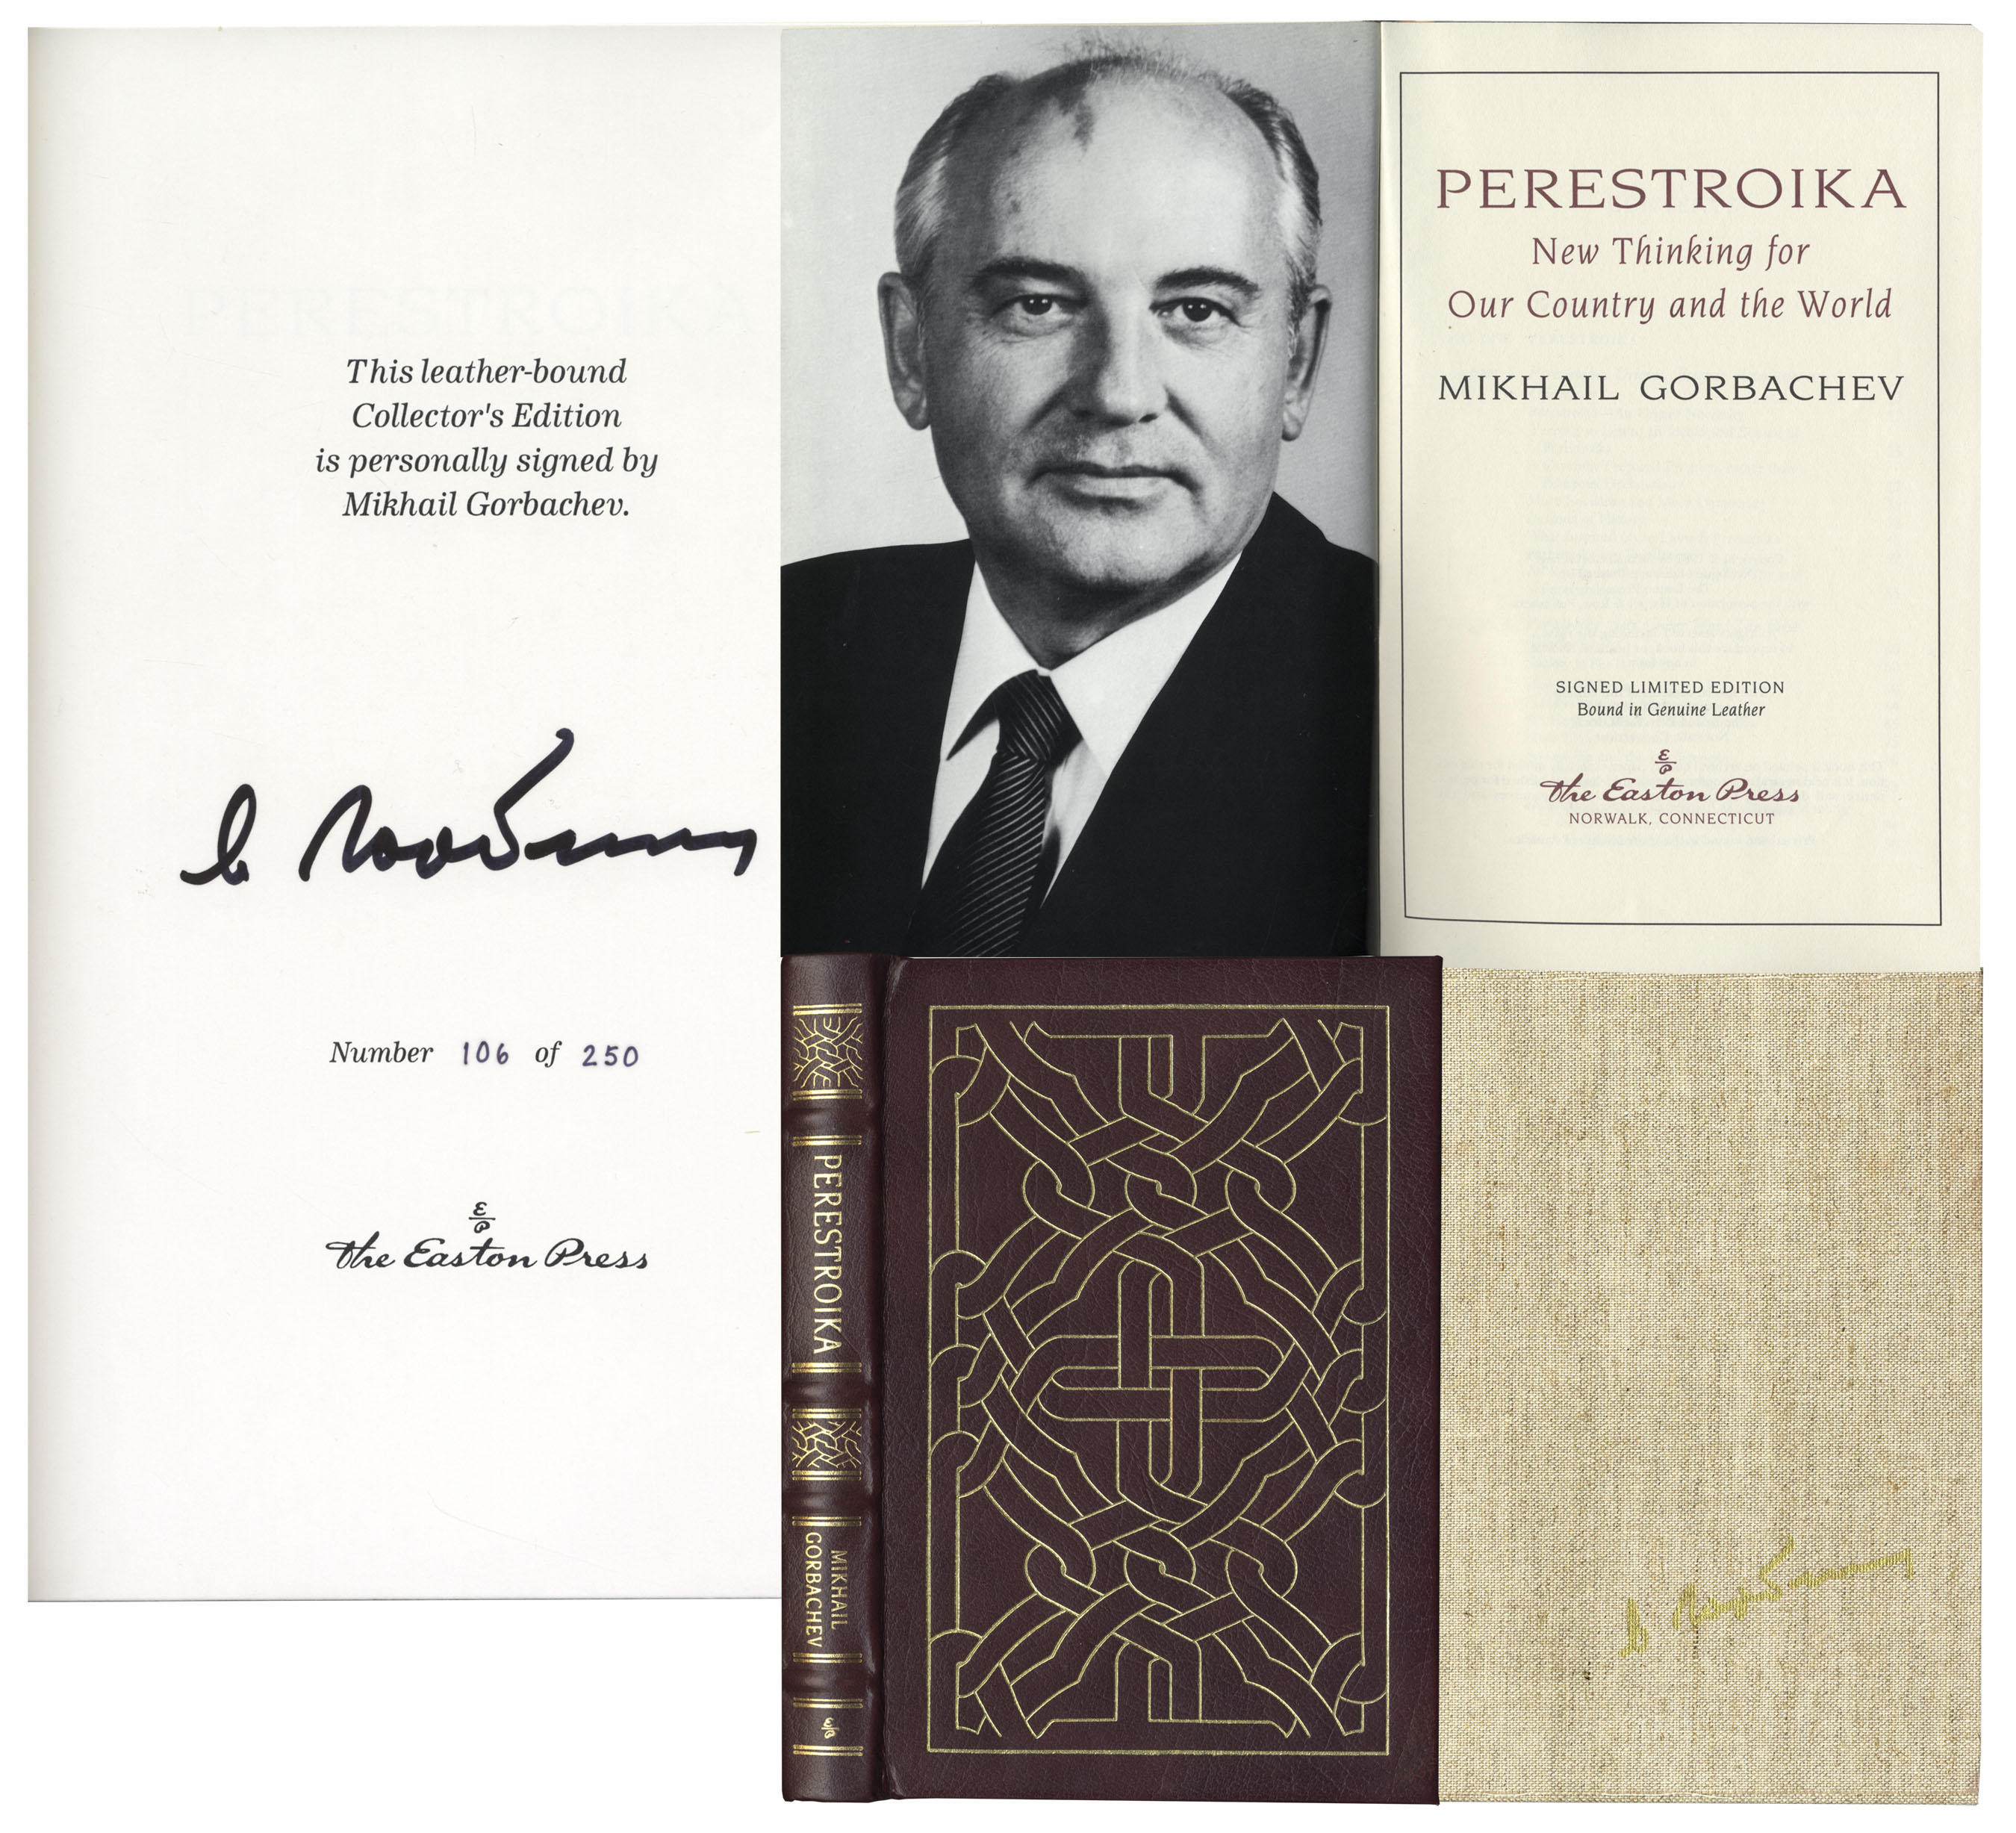 Sell a Mikhail Gorbachev Perestroika Signed at Nate D Sanders Auctions